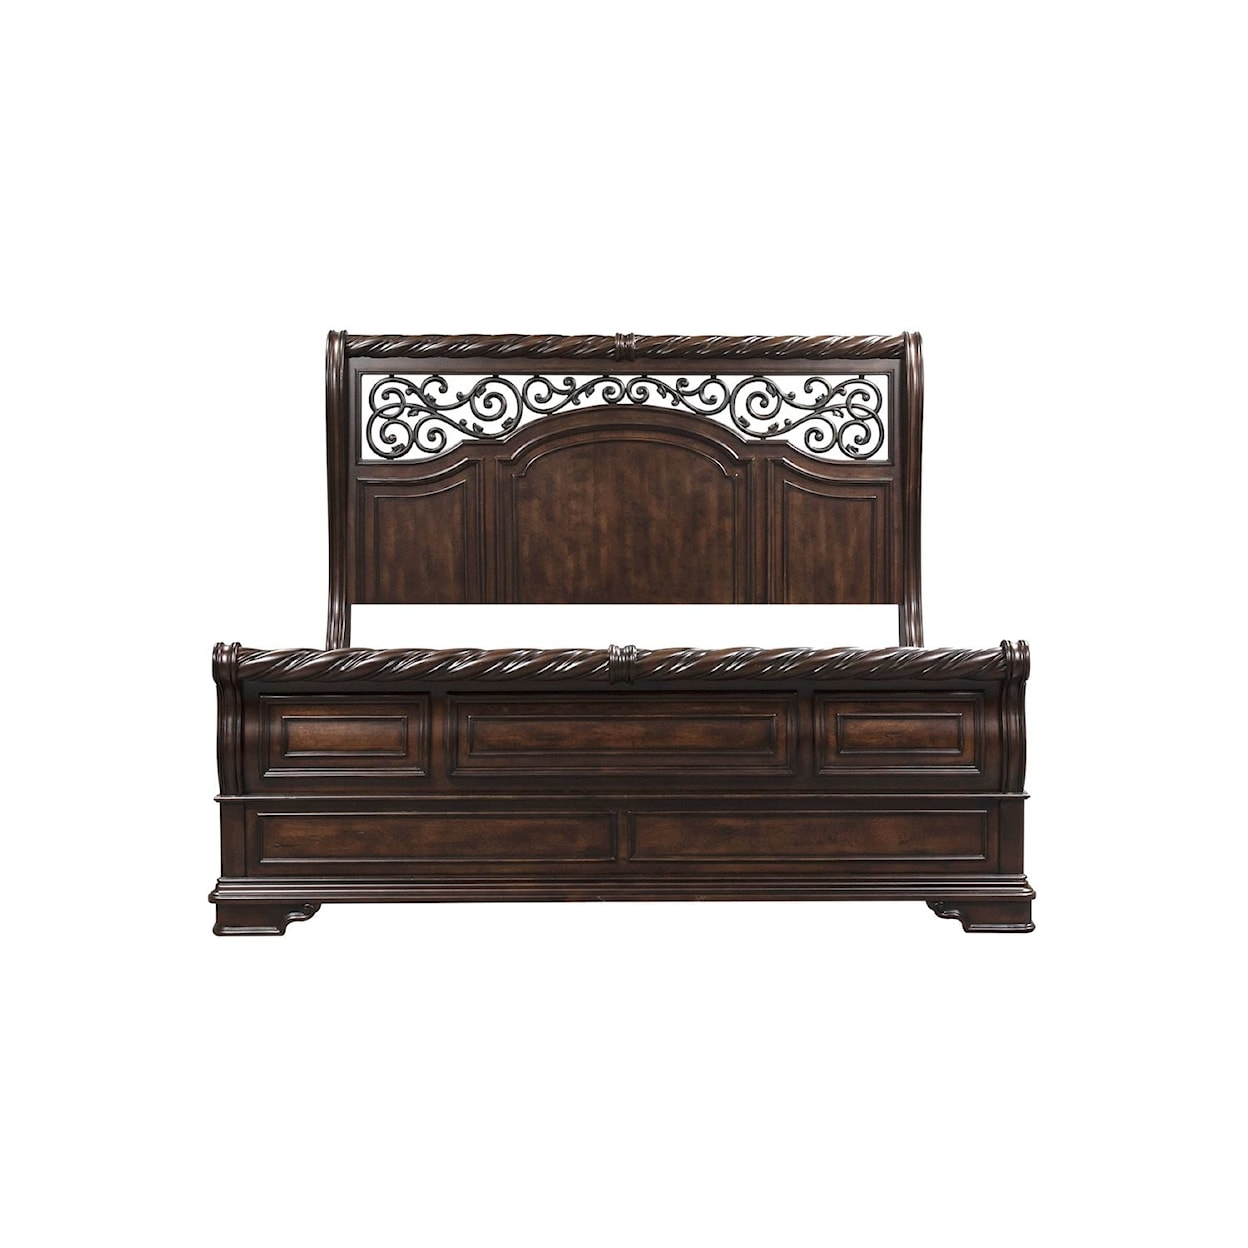 Libby Arbor Place 5-Piece King Bedroom Set